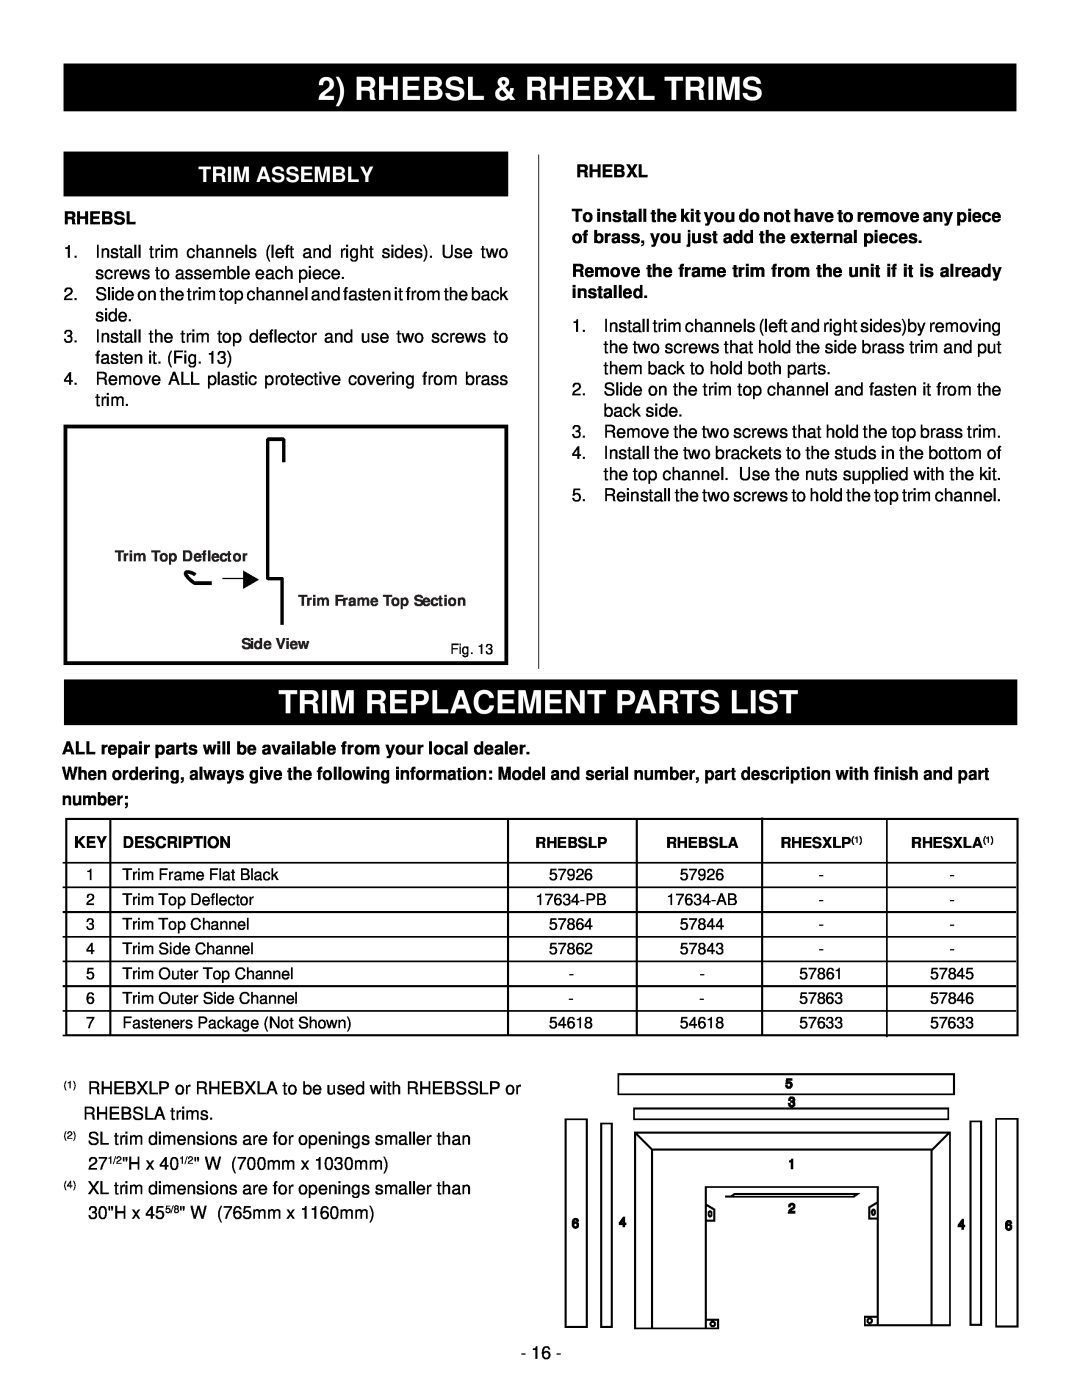 Majestic Appliances HE32EF installation instructions Rhebsl & Rhebxl Trims, Trim Replacement Parts List, Trim Assembly 